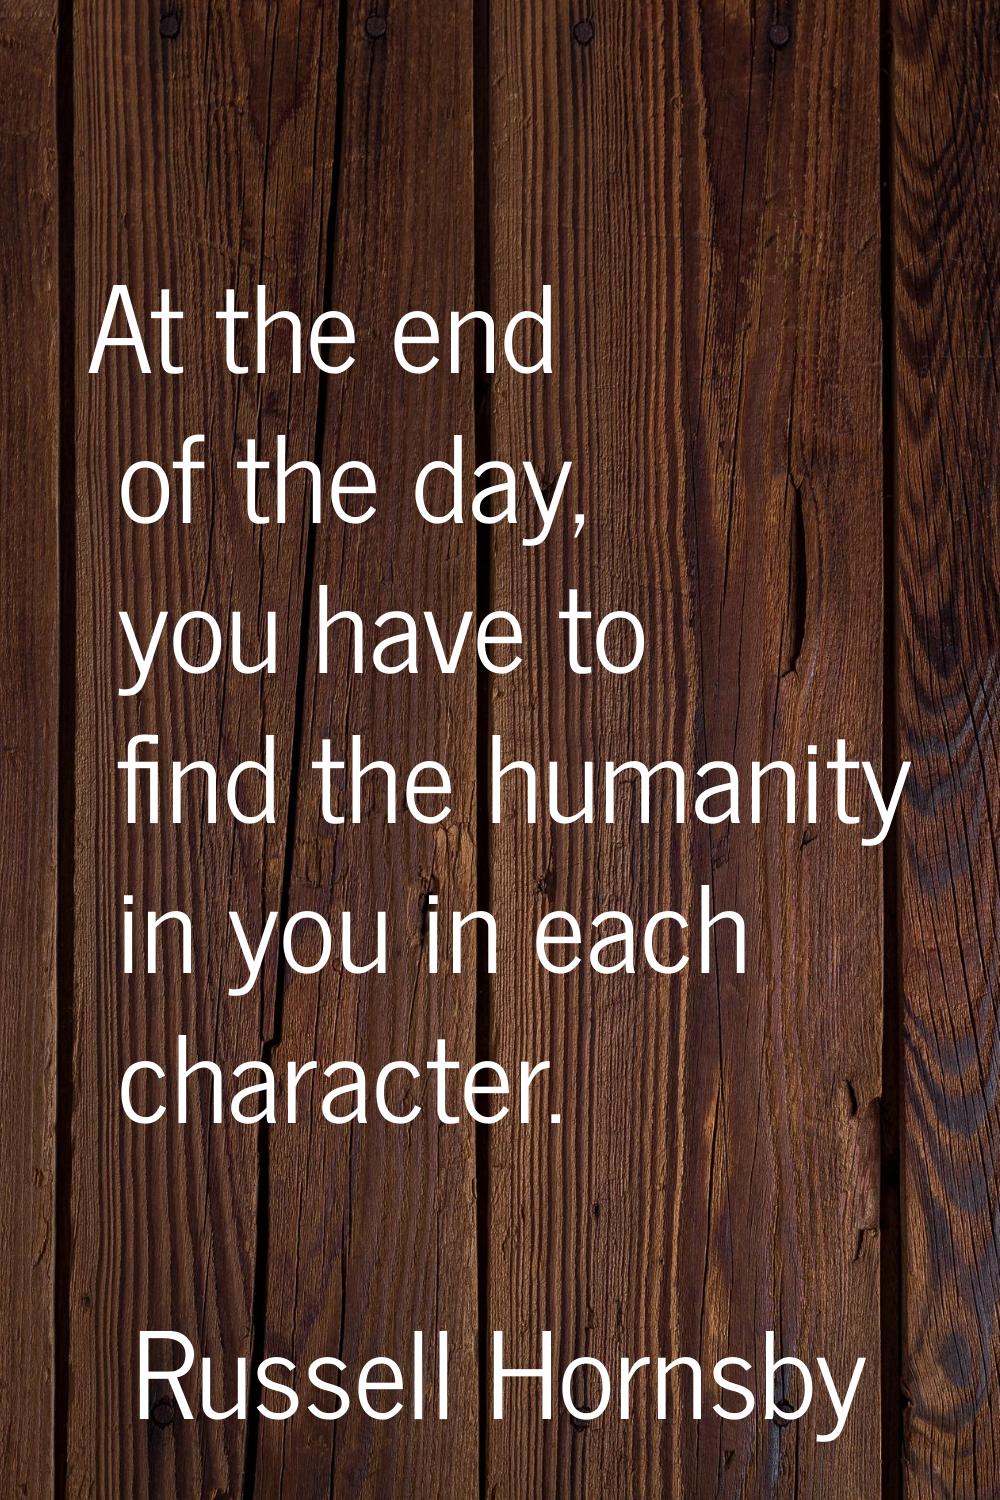 At the end of the day, you have to find the humanity in you in each character.